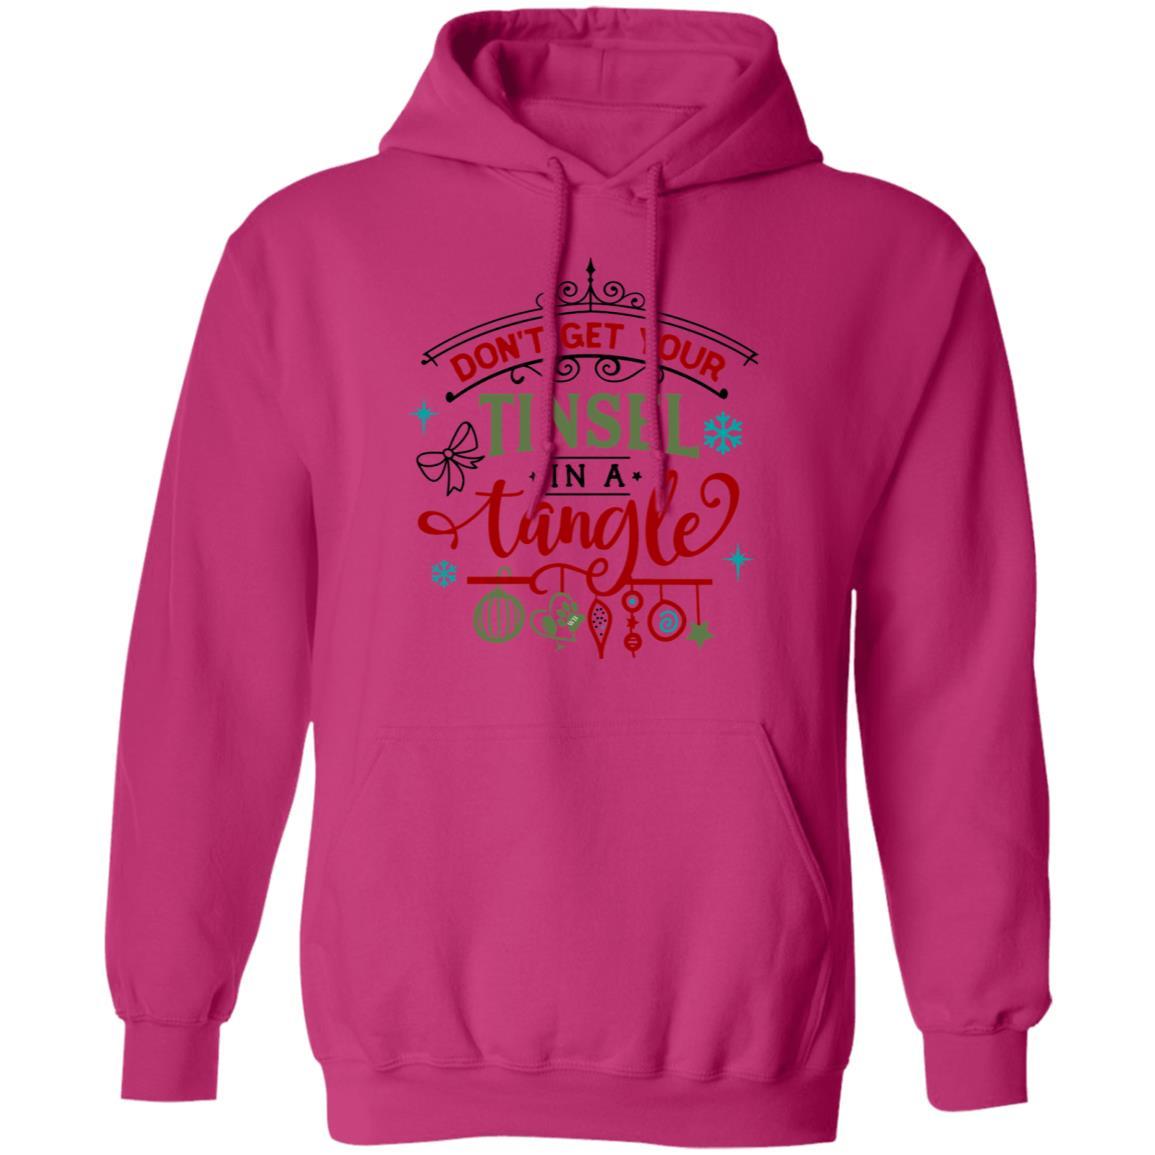 Sweatshirts Heliconia / S WineyBitches.Co 'Don't Get Your Tinsel In A Tangle" Pullover Hoodie 8 oz. WineyBitchesCo